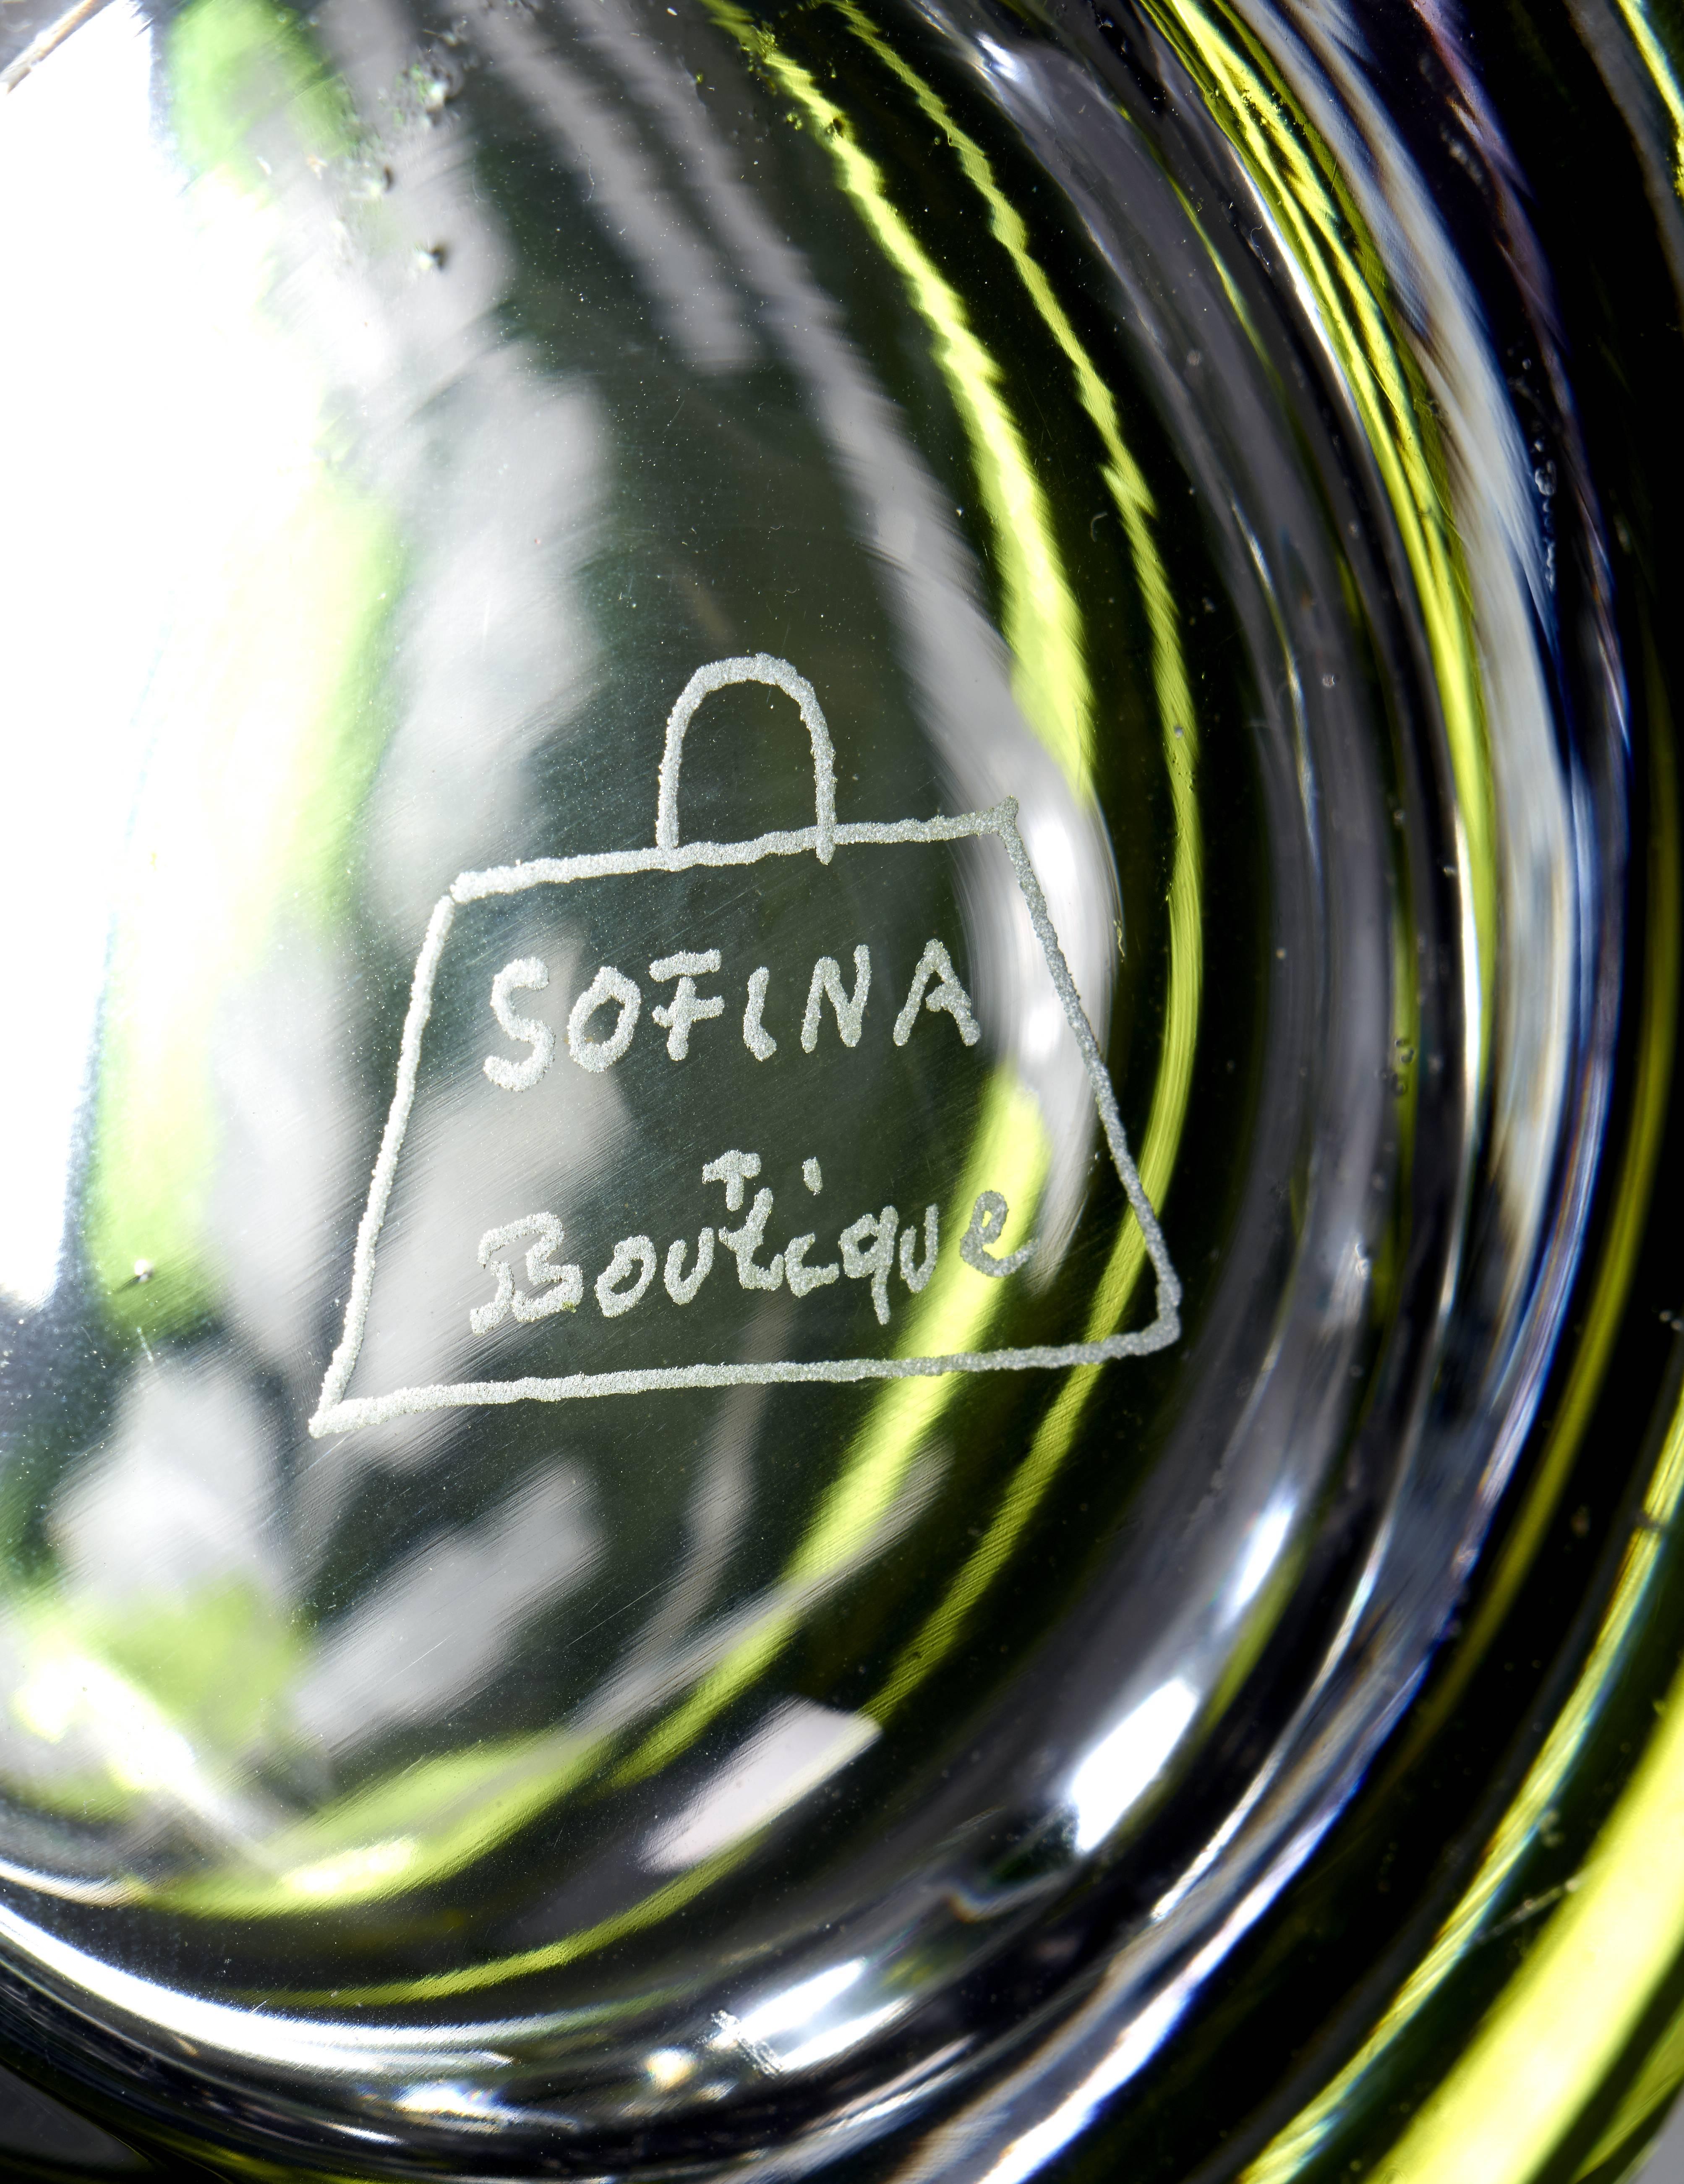 About Sofina Crystal:
This handblown Crystal vase is one of a selection of Sofina crystal hand-crafted in Bavaria/Germany. Can be used as a vase or with candles. The two birds sitting on oak leaves are free-hands engraved . Here shown in dark green